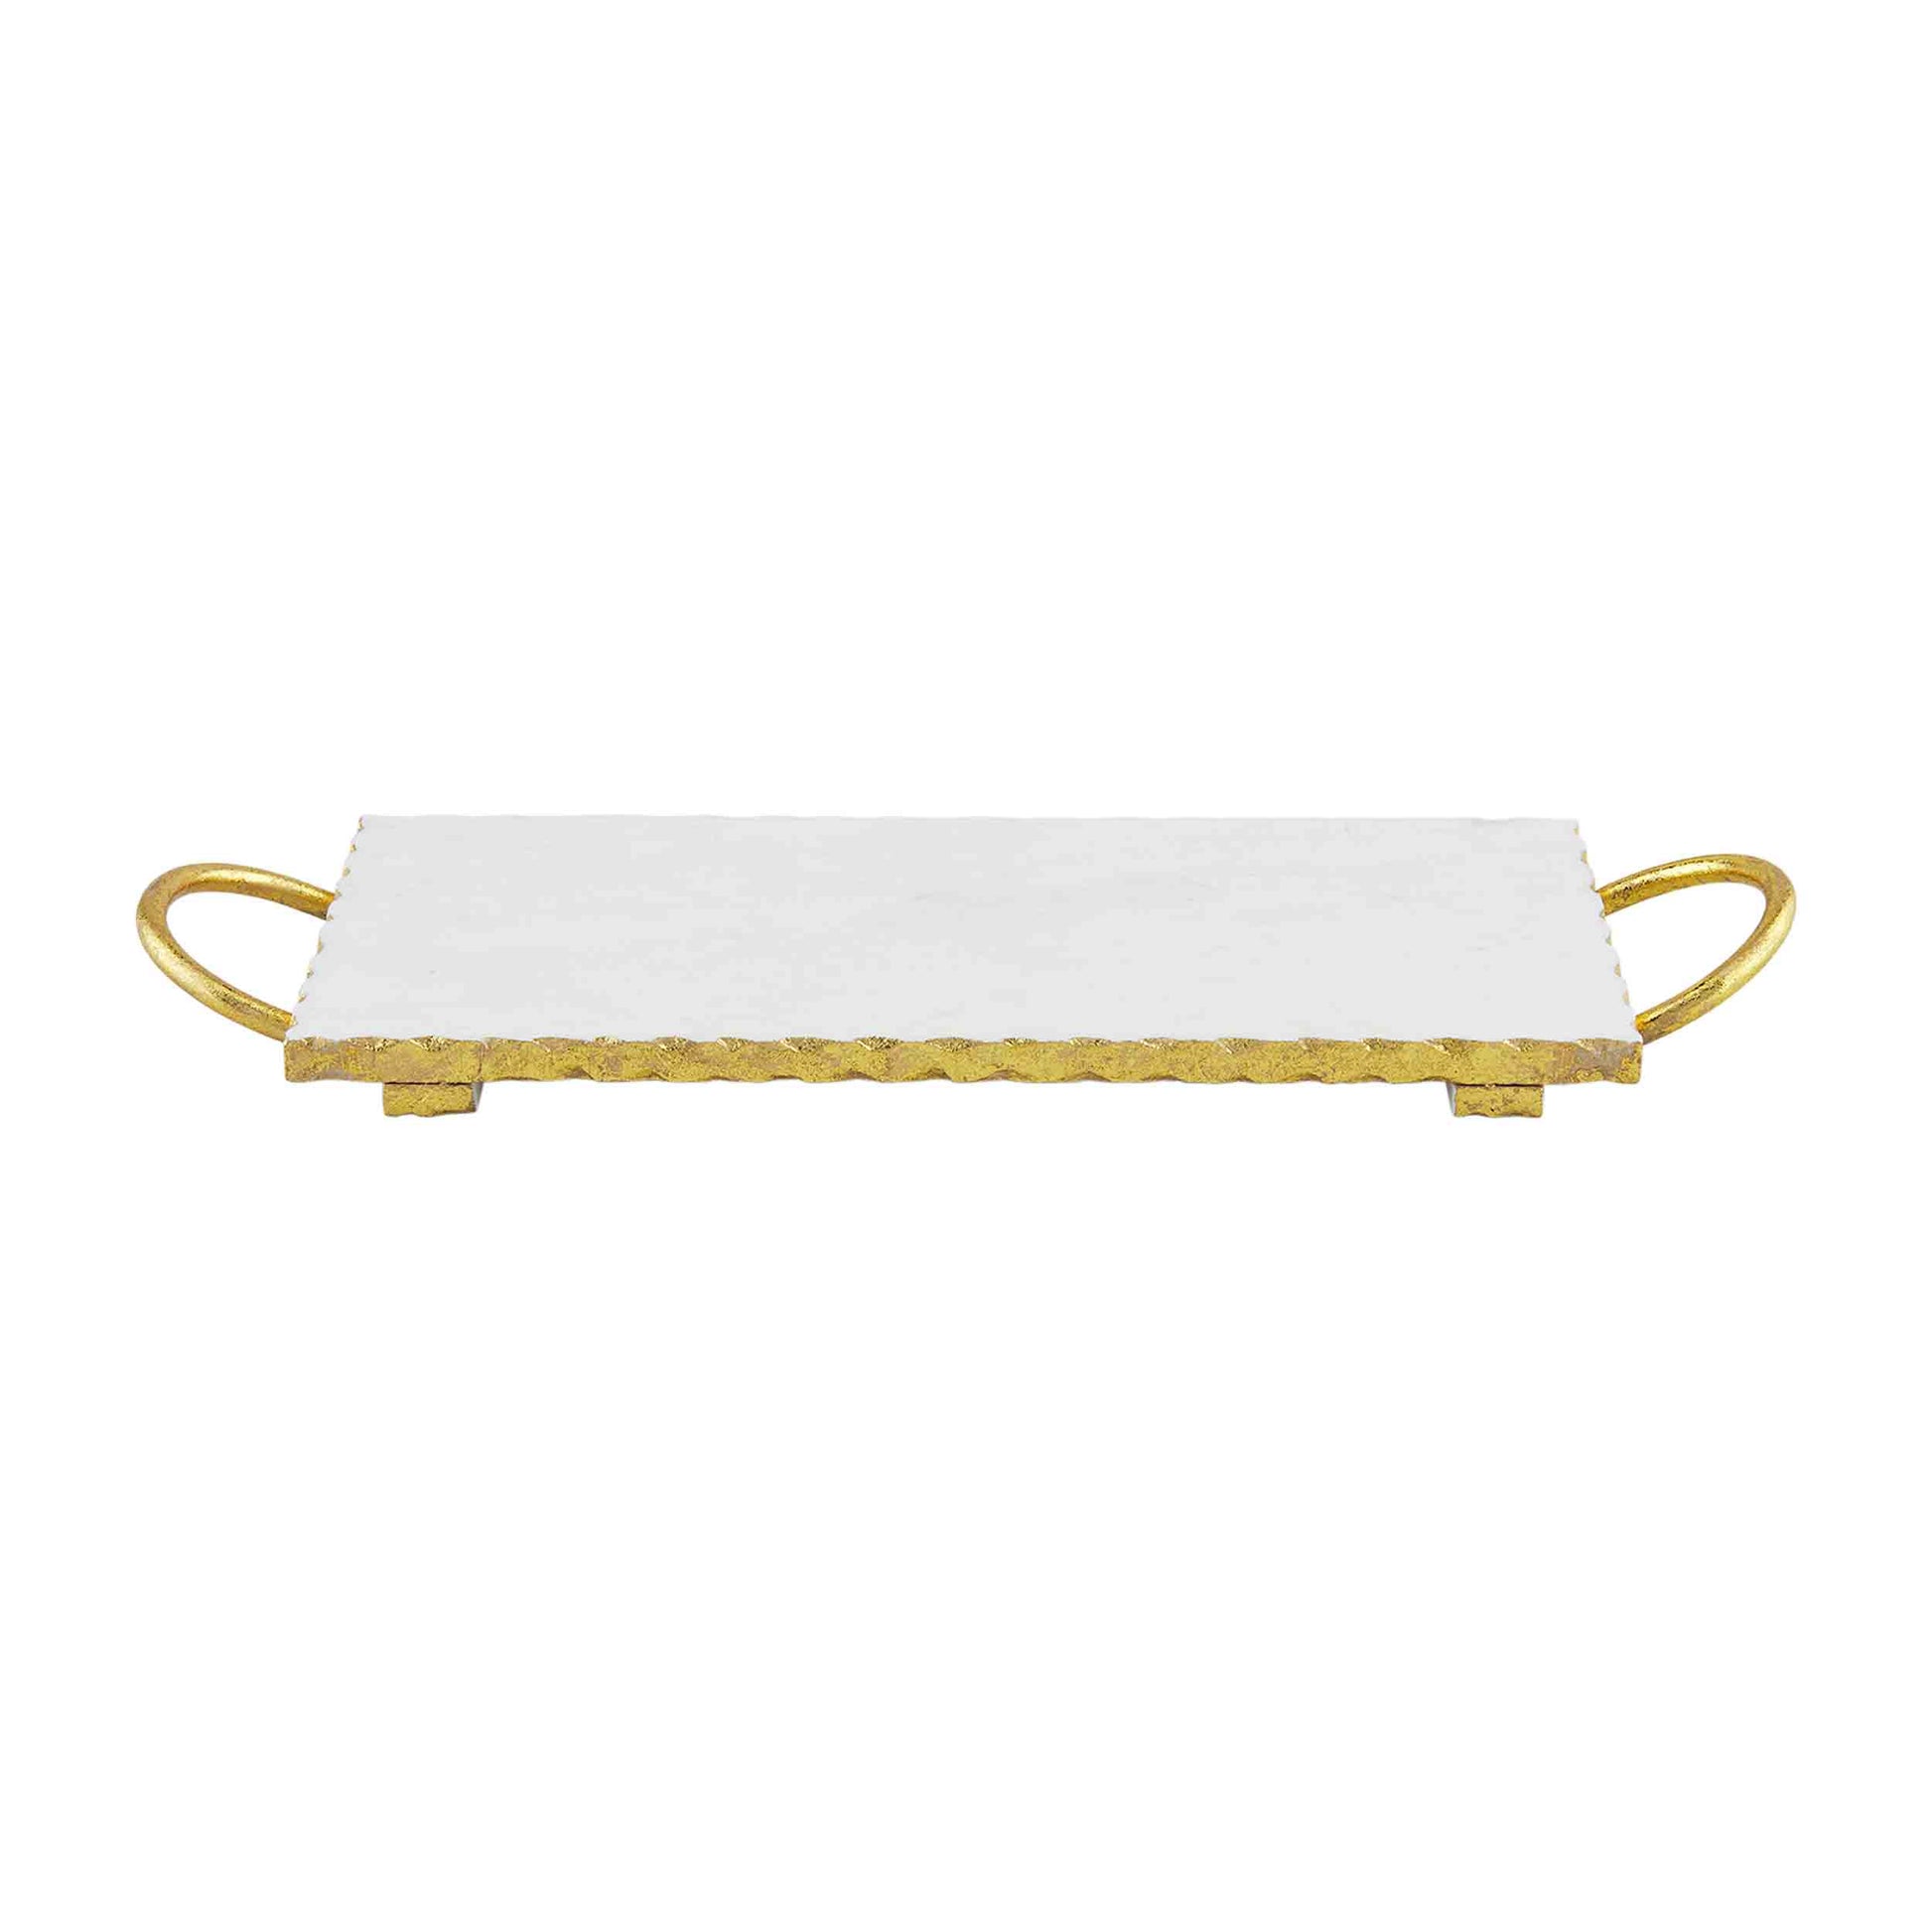 Personalized Gold Edge Marble Board w/Handles